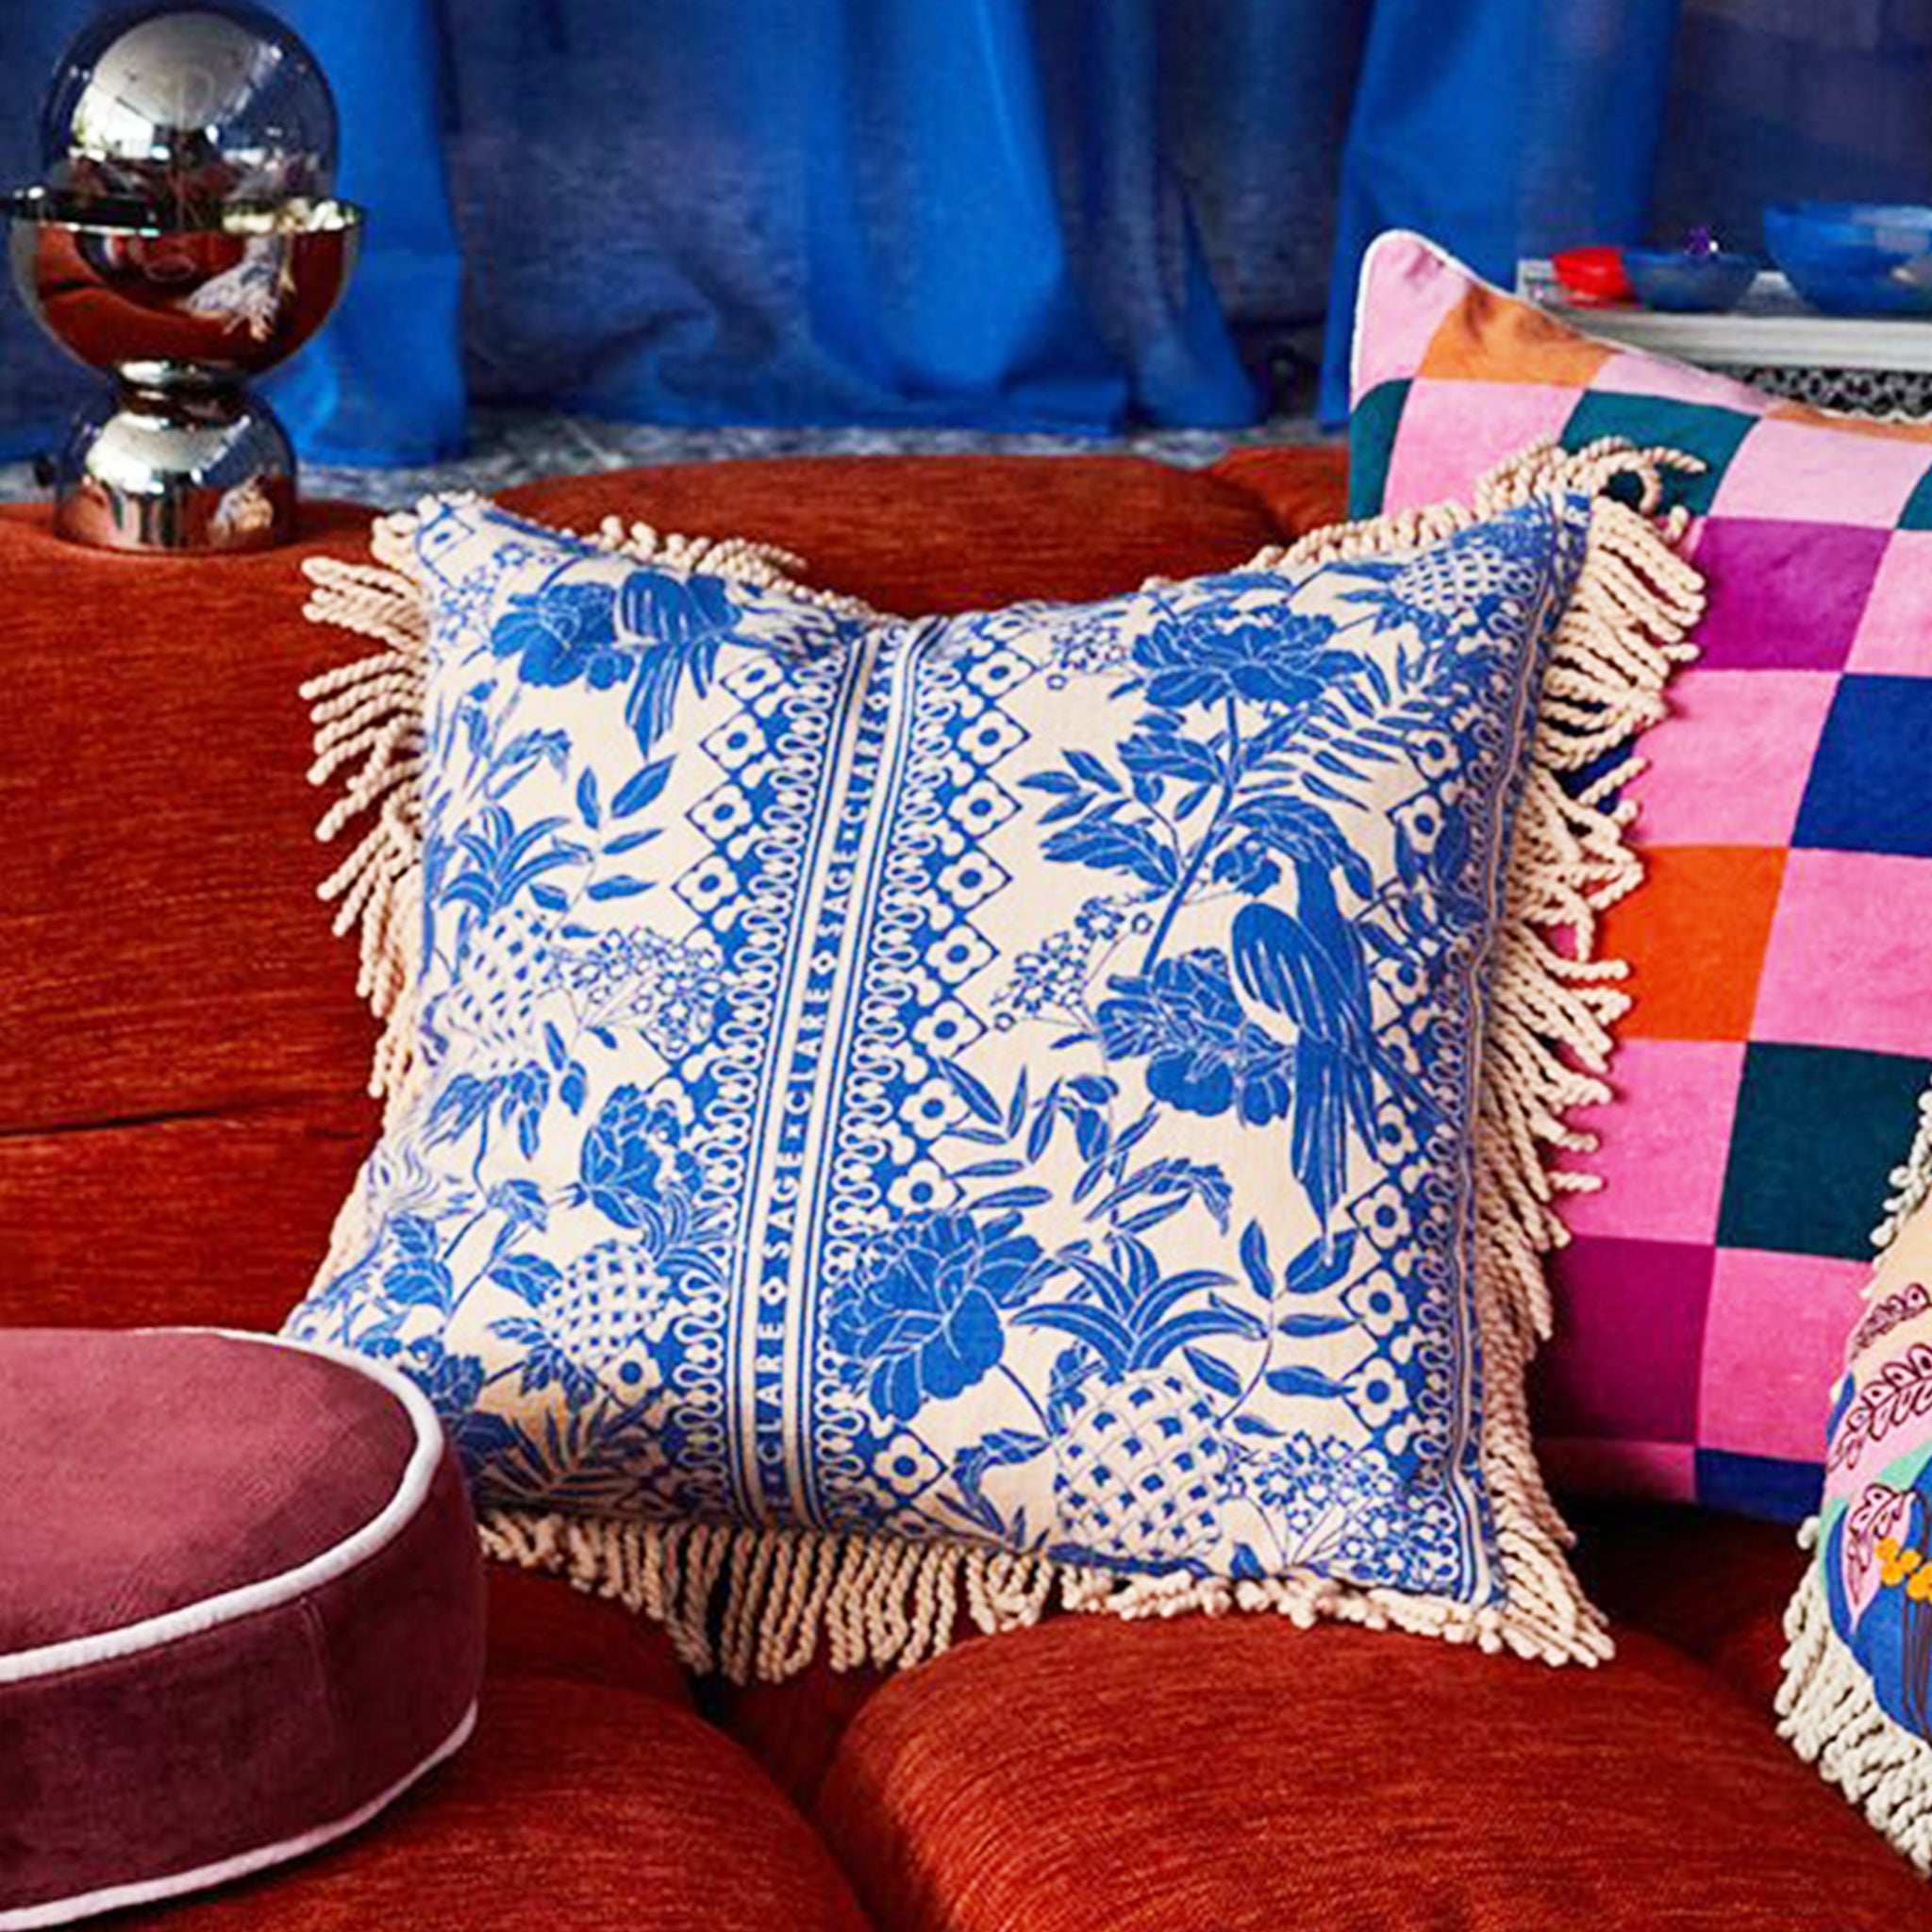 A blue and ivory tropical print pillow with a tassel detail along the edges.